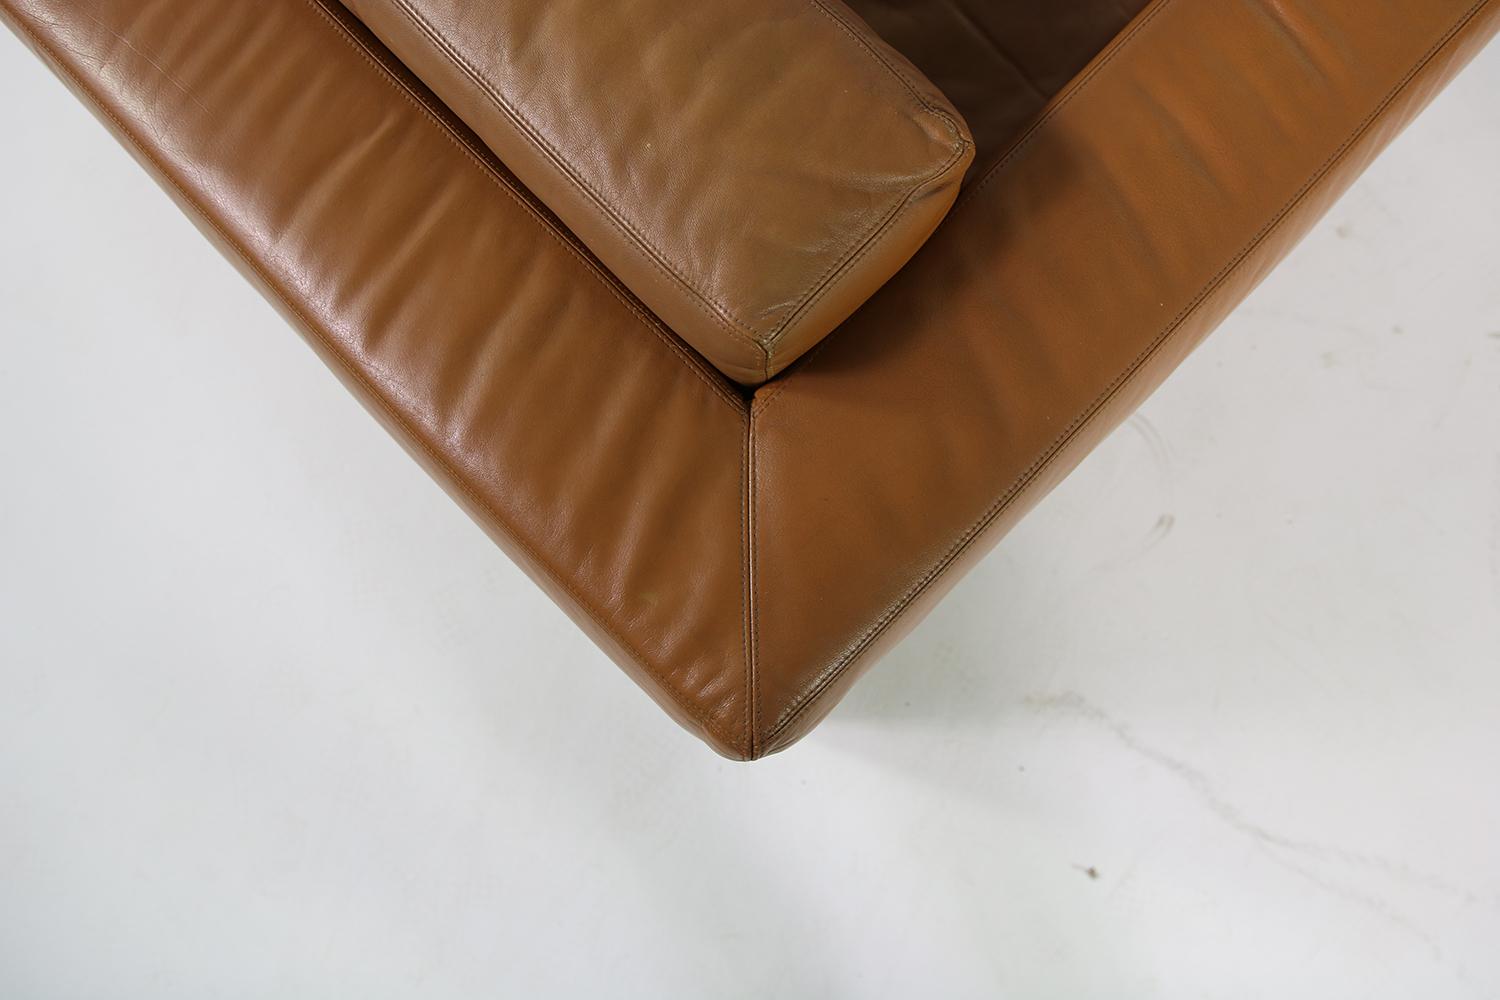 Formica Unique & Large 1960s Landscape Sofa & Chairs Brown Leather Made to Order 1969 For Sale